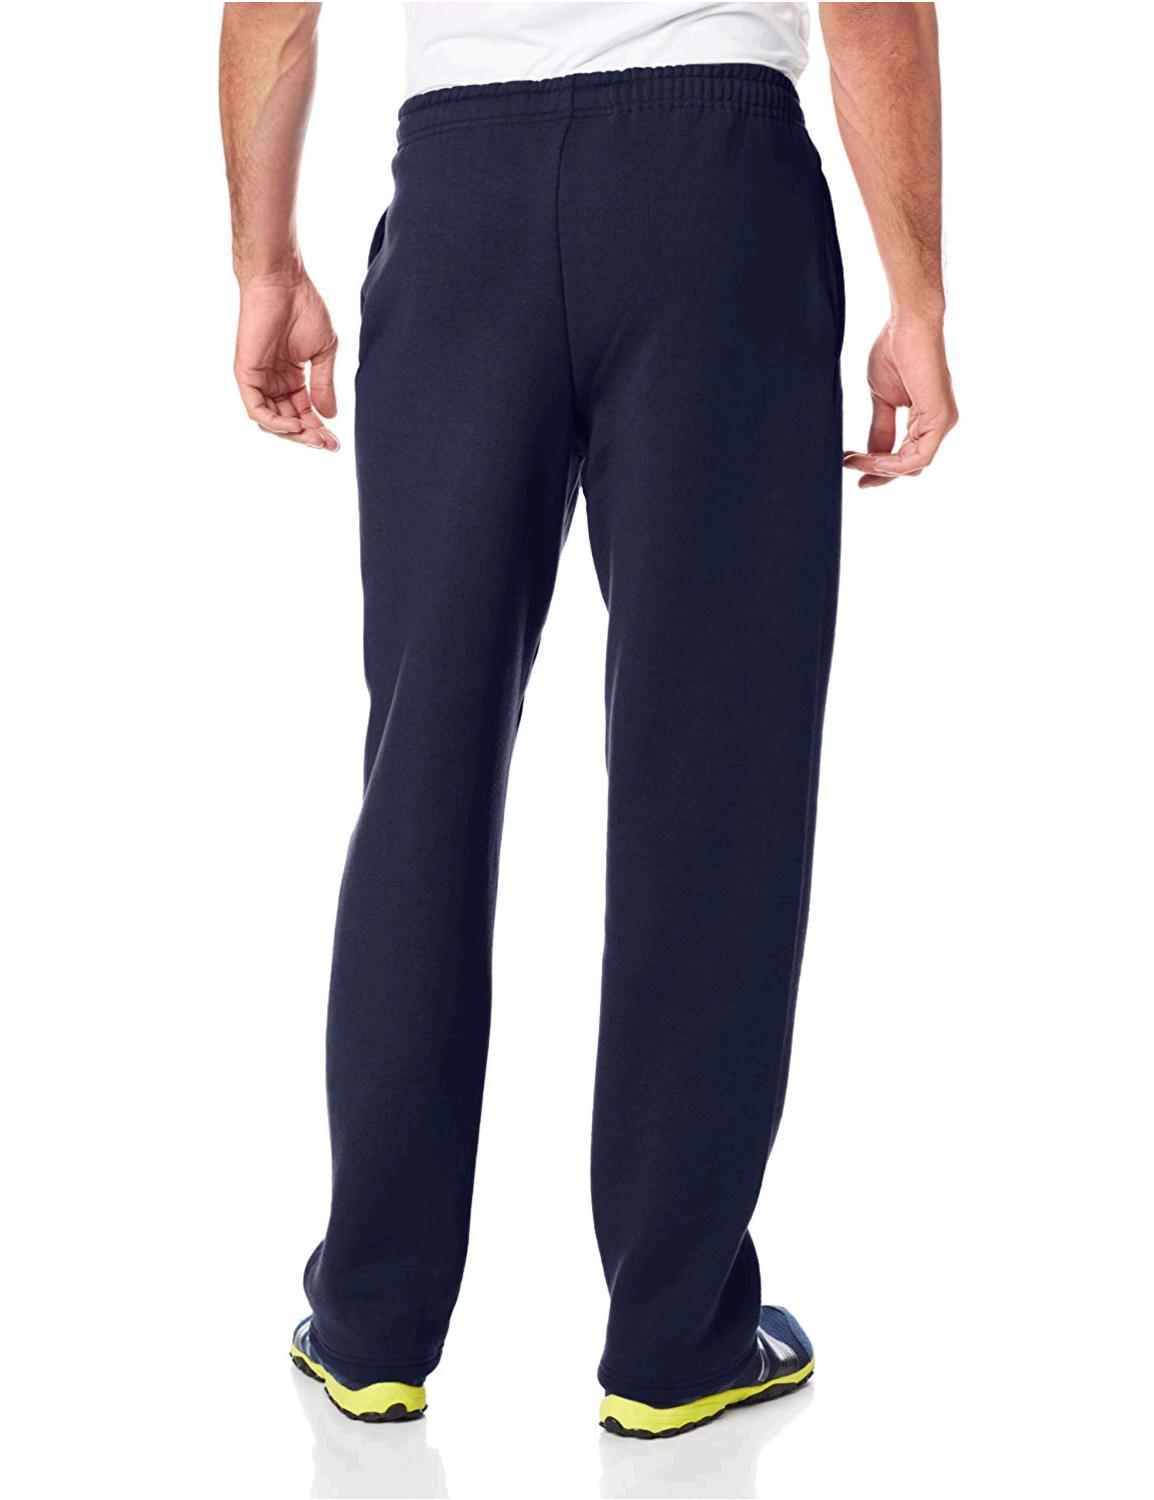 Russell Athletic Men's Dri-Power Open Bottom Sweatpants with, Navy ...